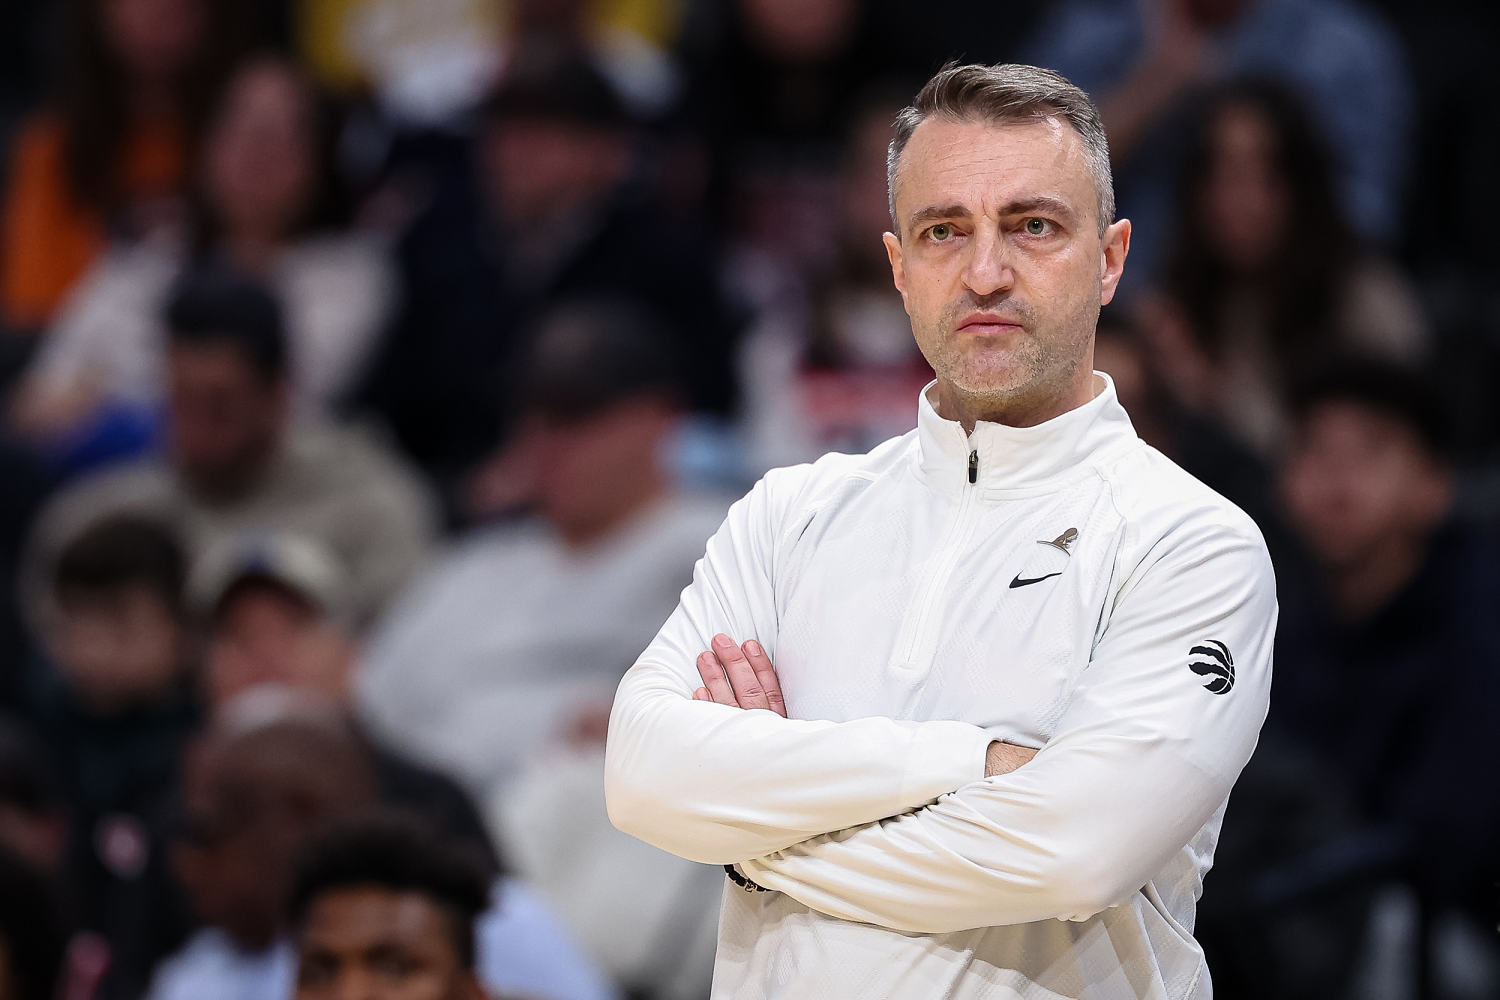 NBA fines Toronto Raptors coach $25,000 after he called officiating 'B.S' and a 'shame'